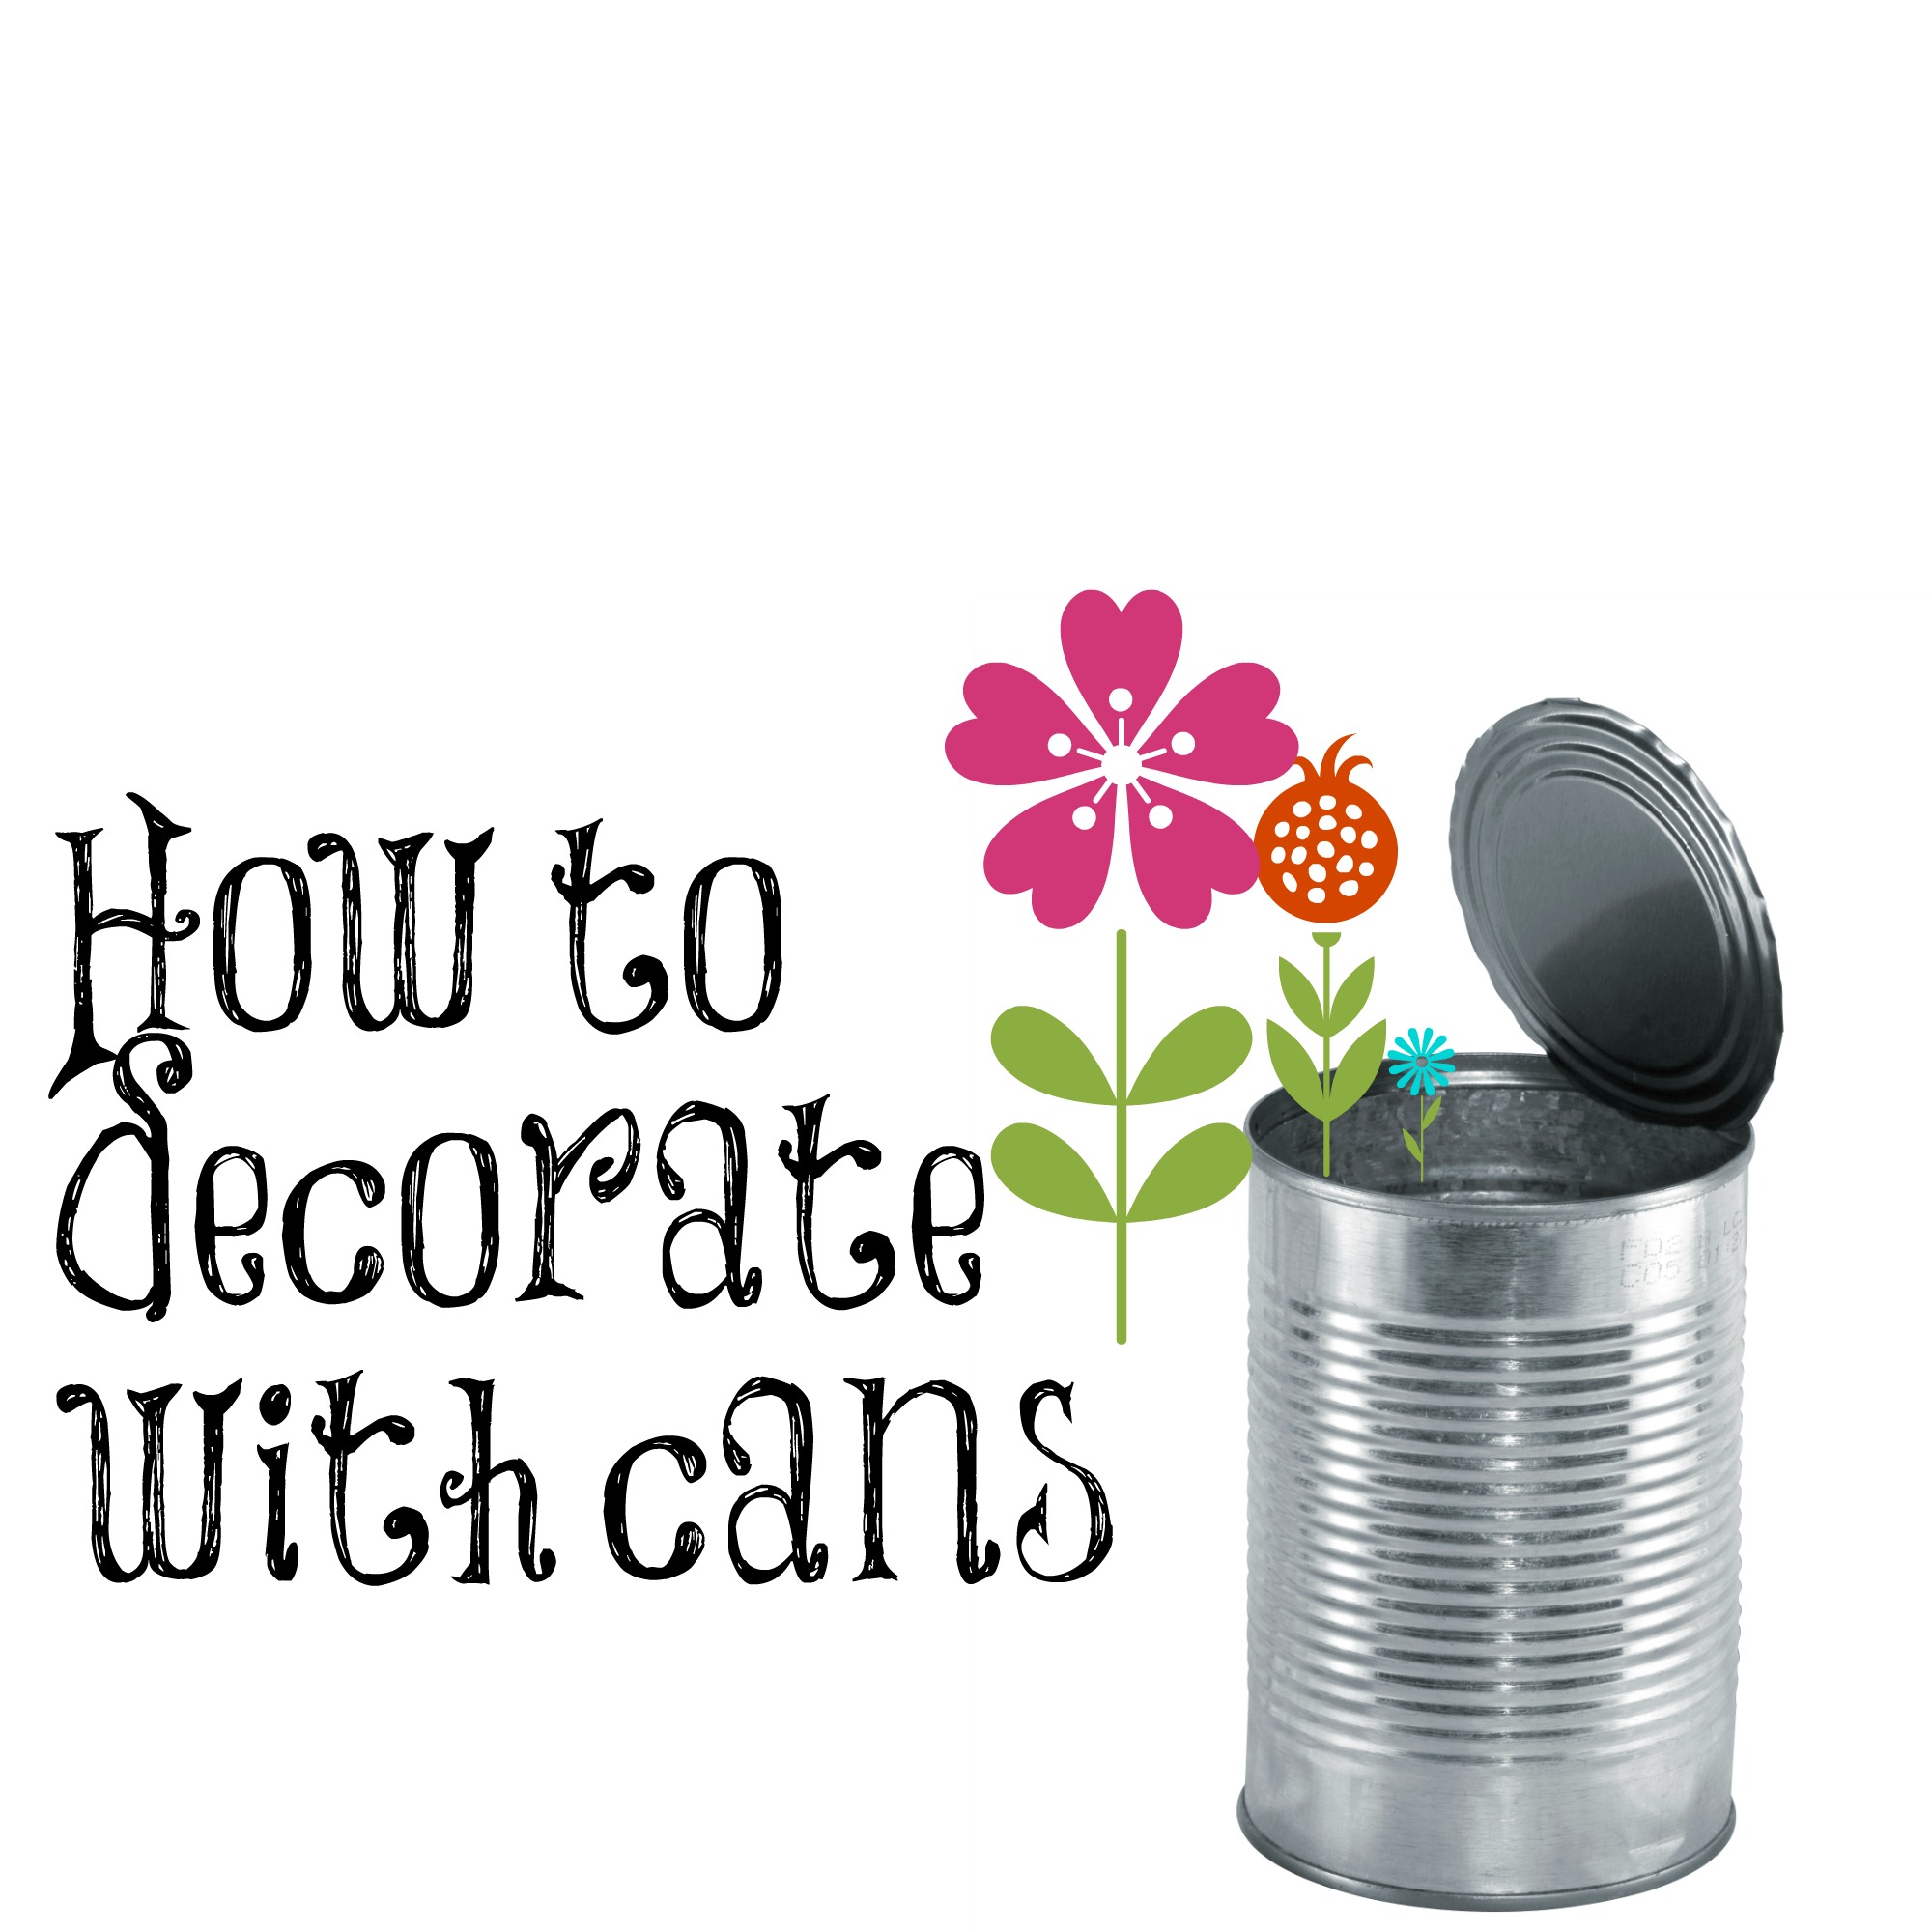 How to decorate with cans